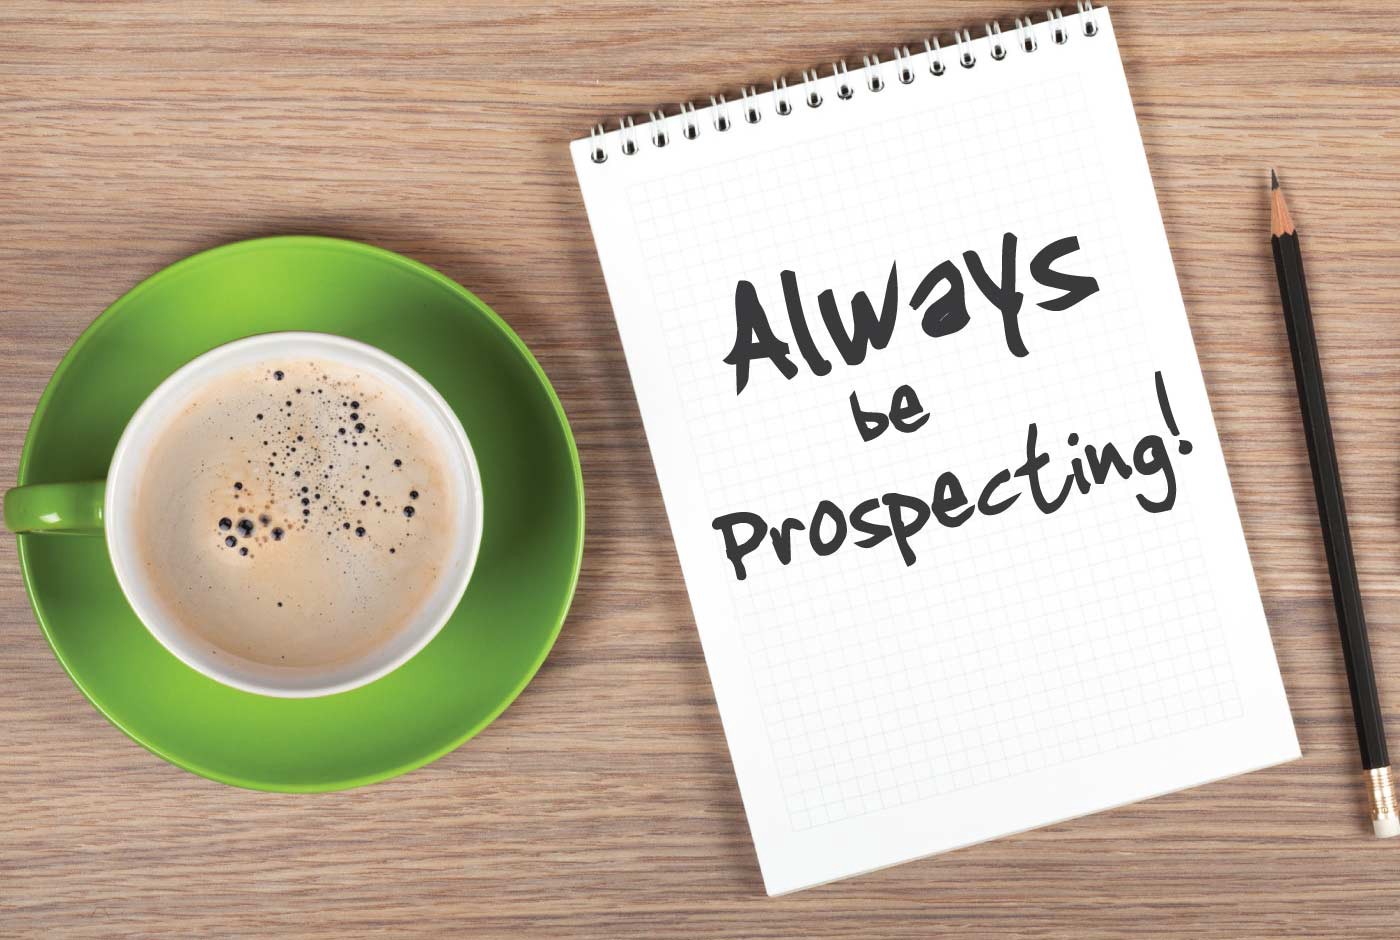 Sales Prospecting – Increase Your Sales by Avoiding Prospecting Mistakes